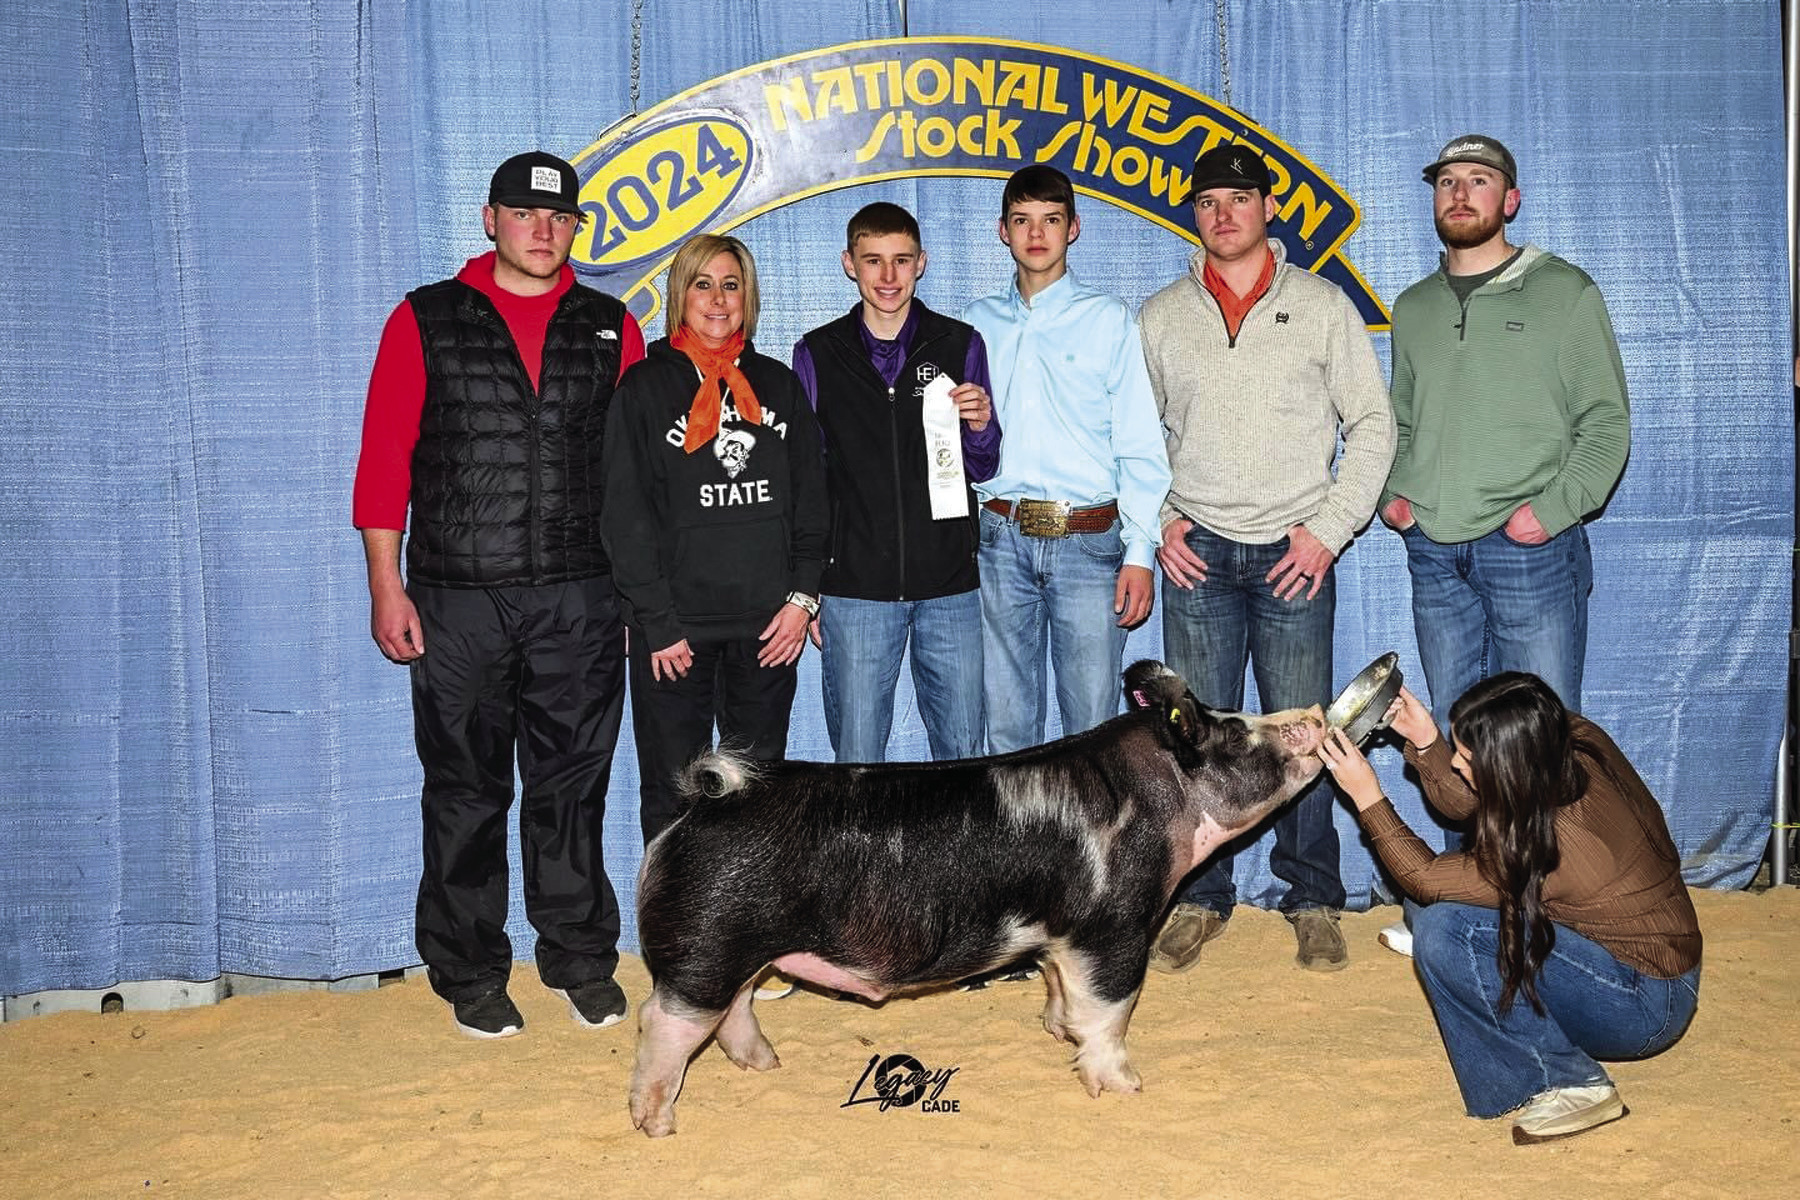 Hydro-Eakly FFA members Crede Woods, third from left, and Kason Proffitt, fourth from left, both showed their barrows this week at the National Western in Denver. Crede was third with his Berkshire barrow while Kason was second with his Crossbred barrow.